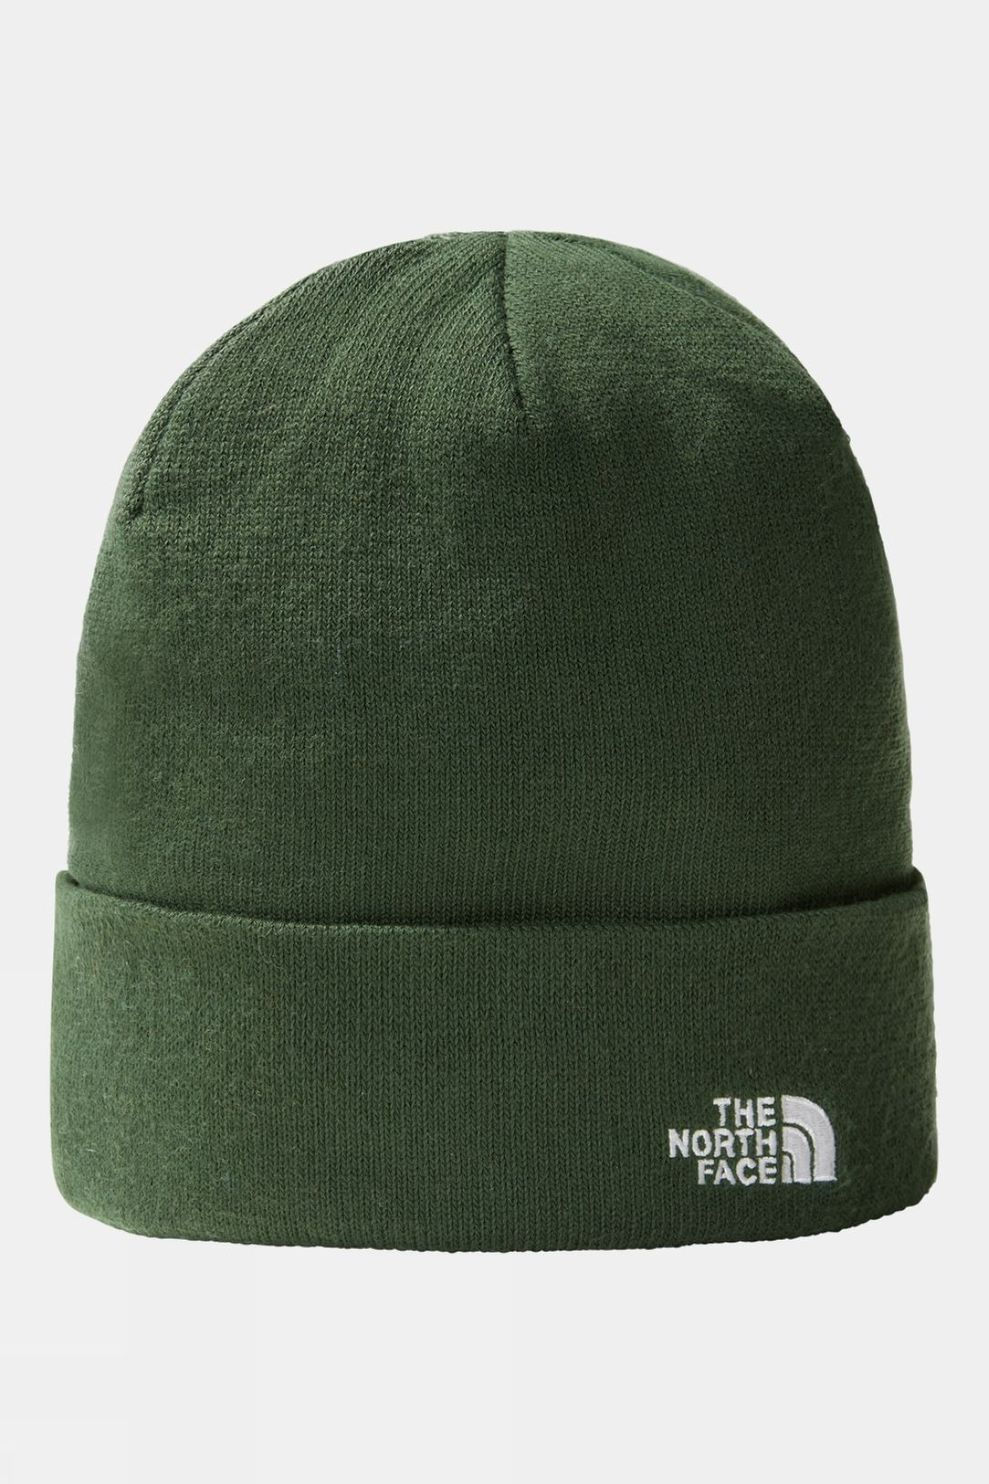 The North Face Unisex Norm Beanie